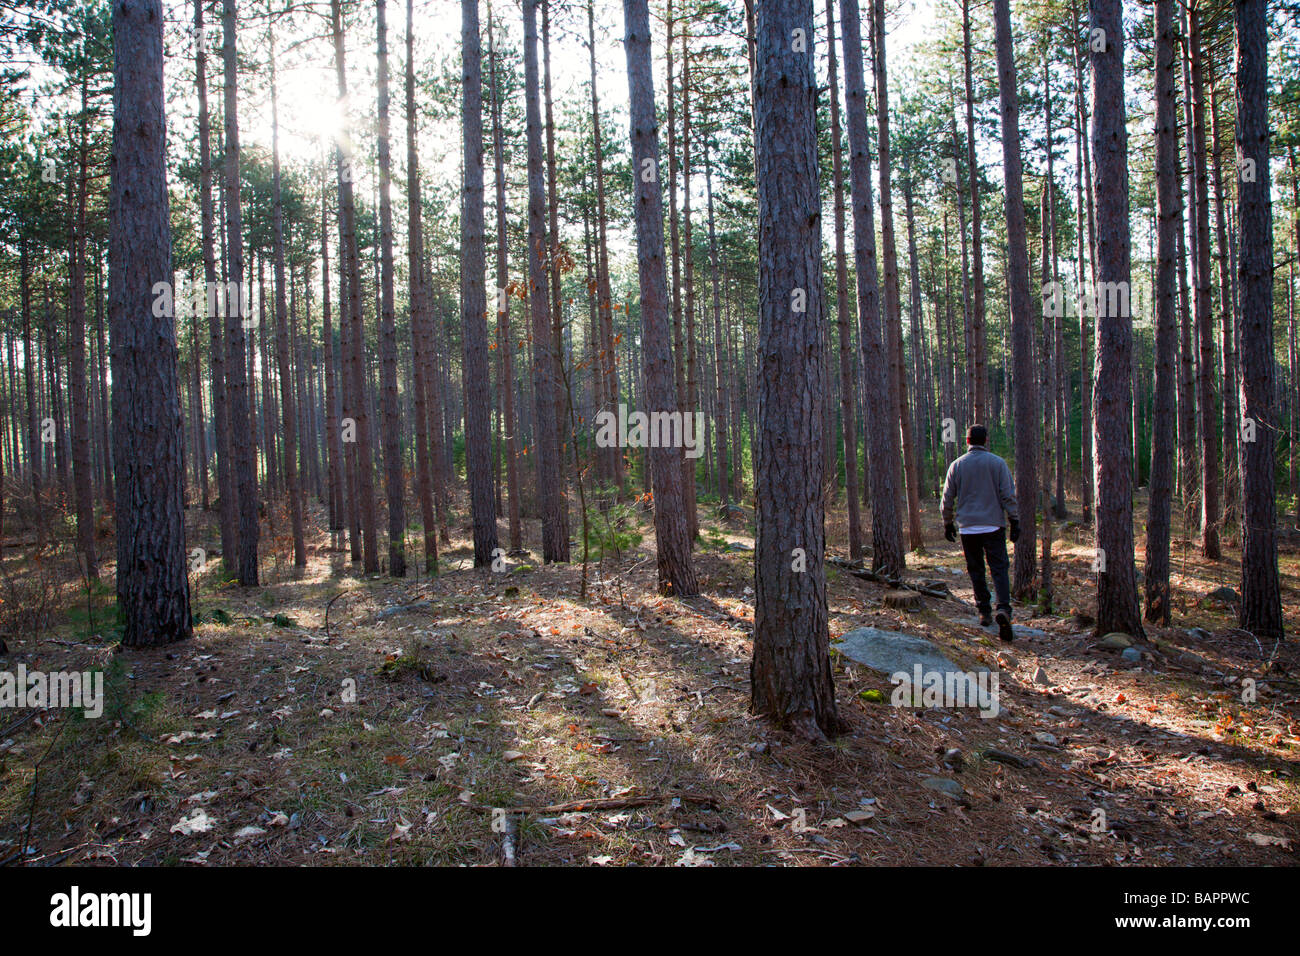 Man walking on trail in a Red Pine Pinus resinosa forest in New England USA Stock Photo